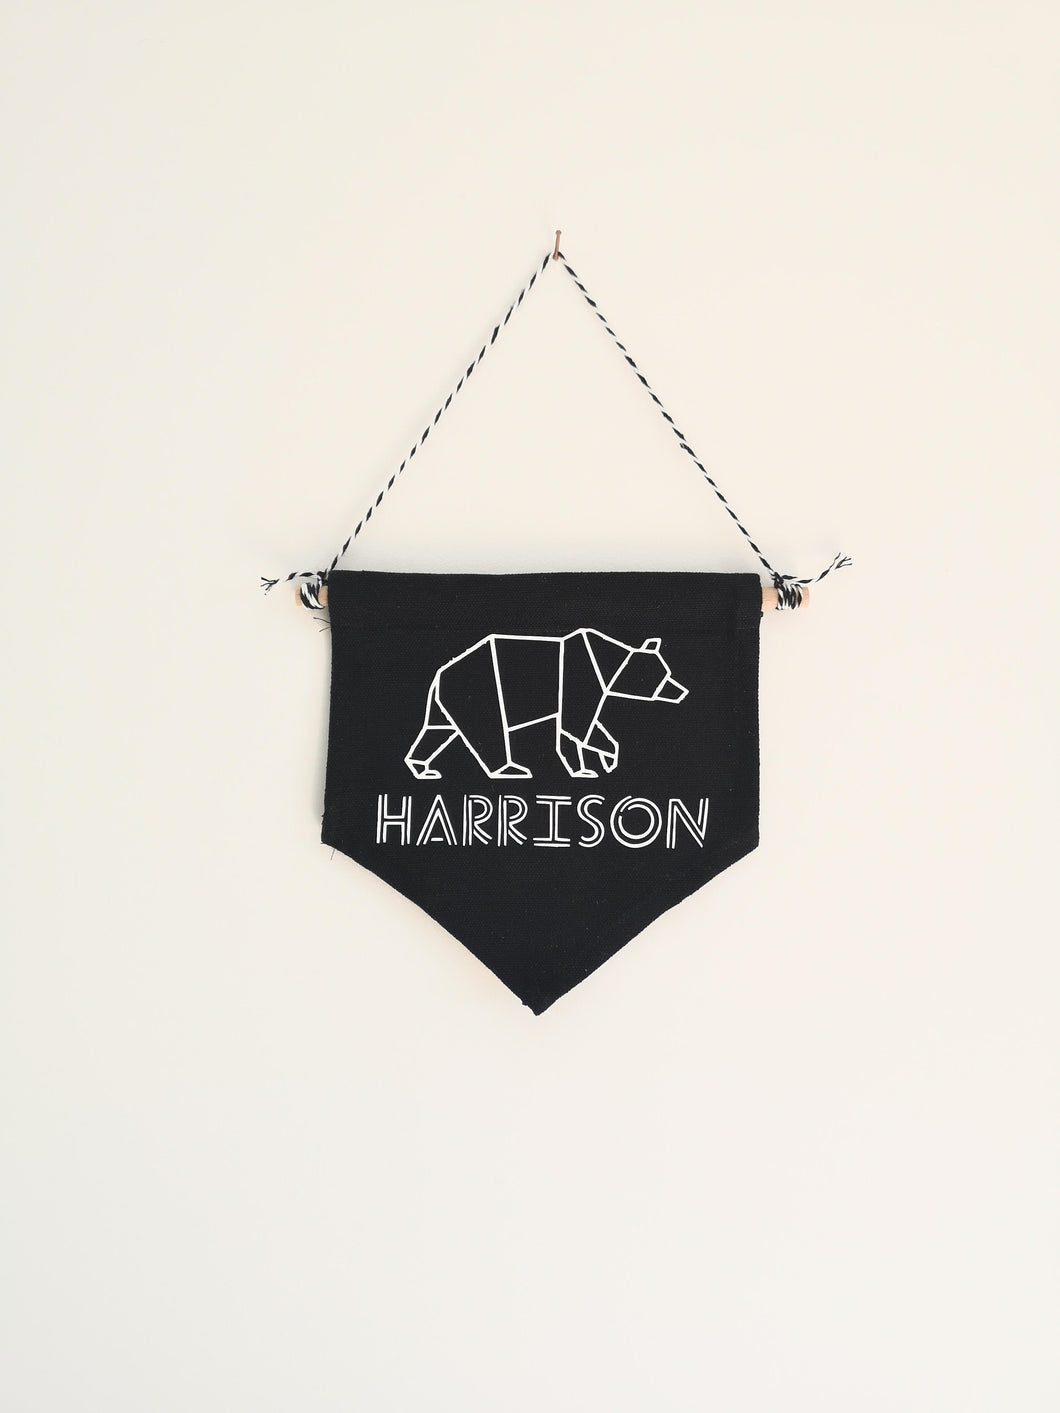 Personalised Pennant Bedroom Decoration - The Monkey Box